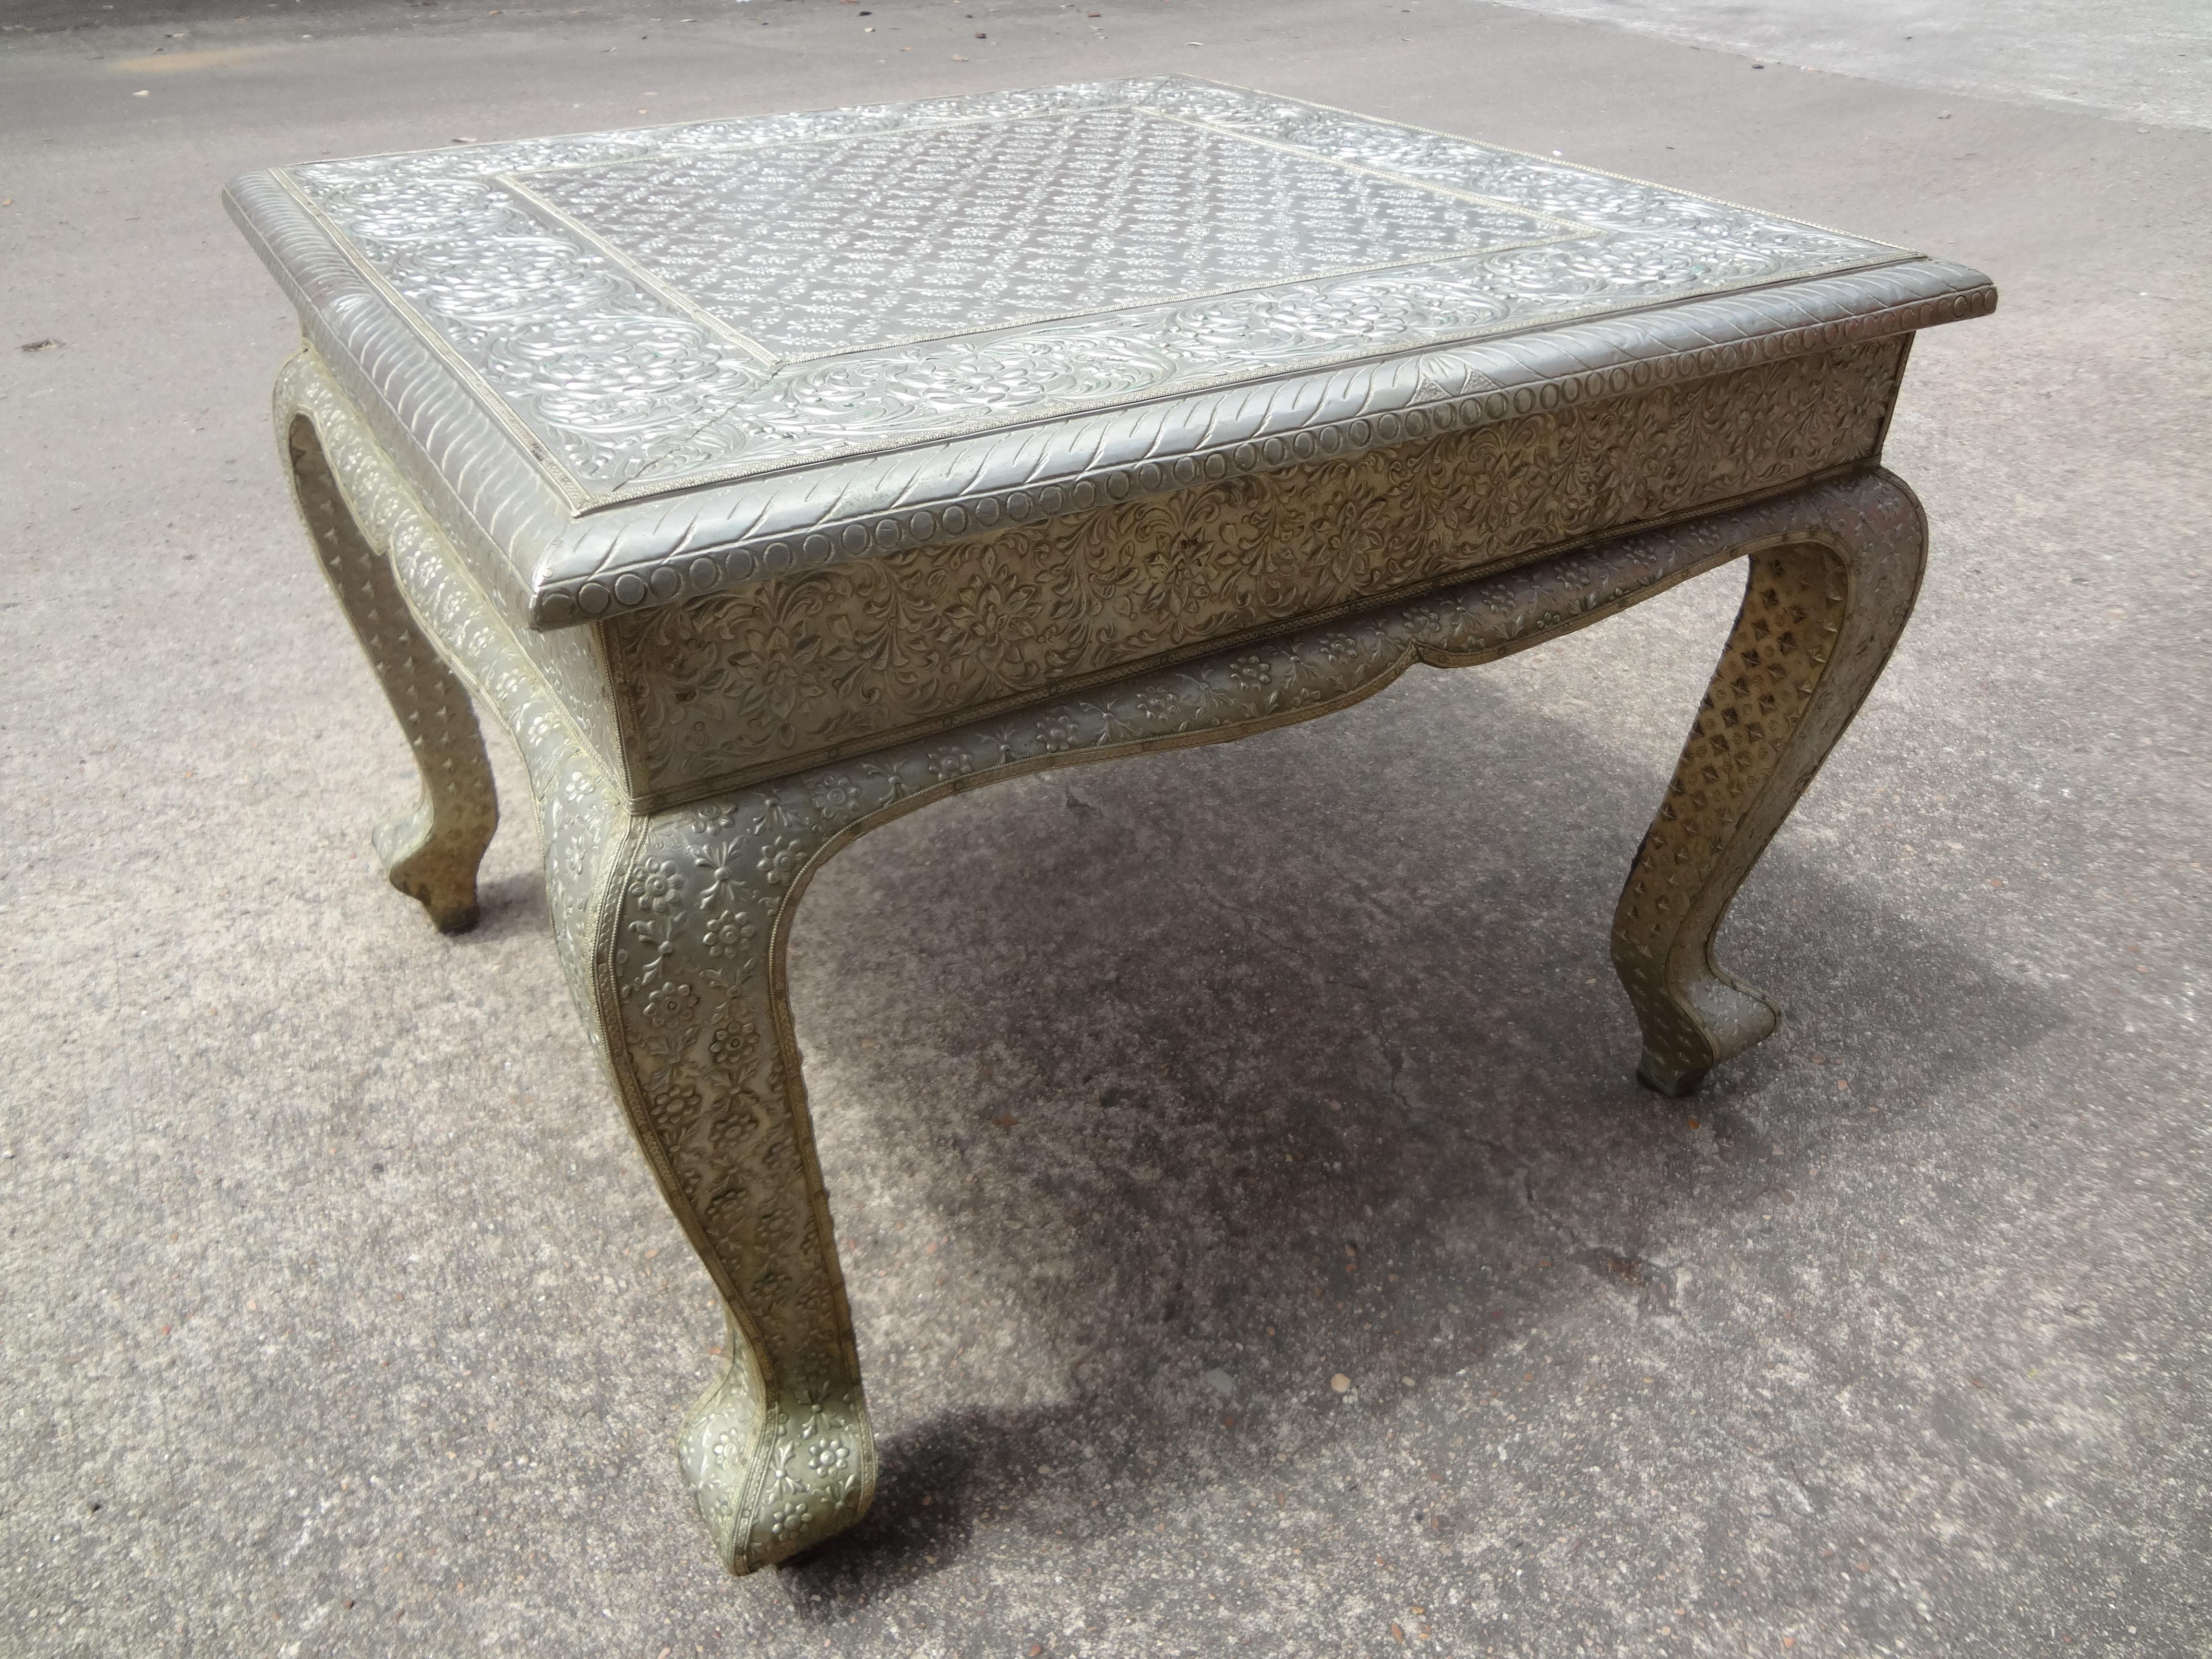 Vintage Anglo-Indian metal clad table.
Great vintage Anglo-Indian silver metal clad square table. This versatile table can be used as a side table, end table, coffee table or cocktail table.